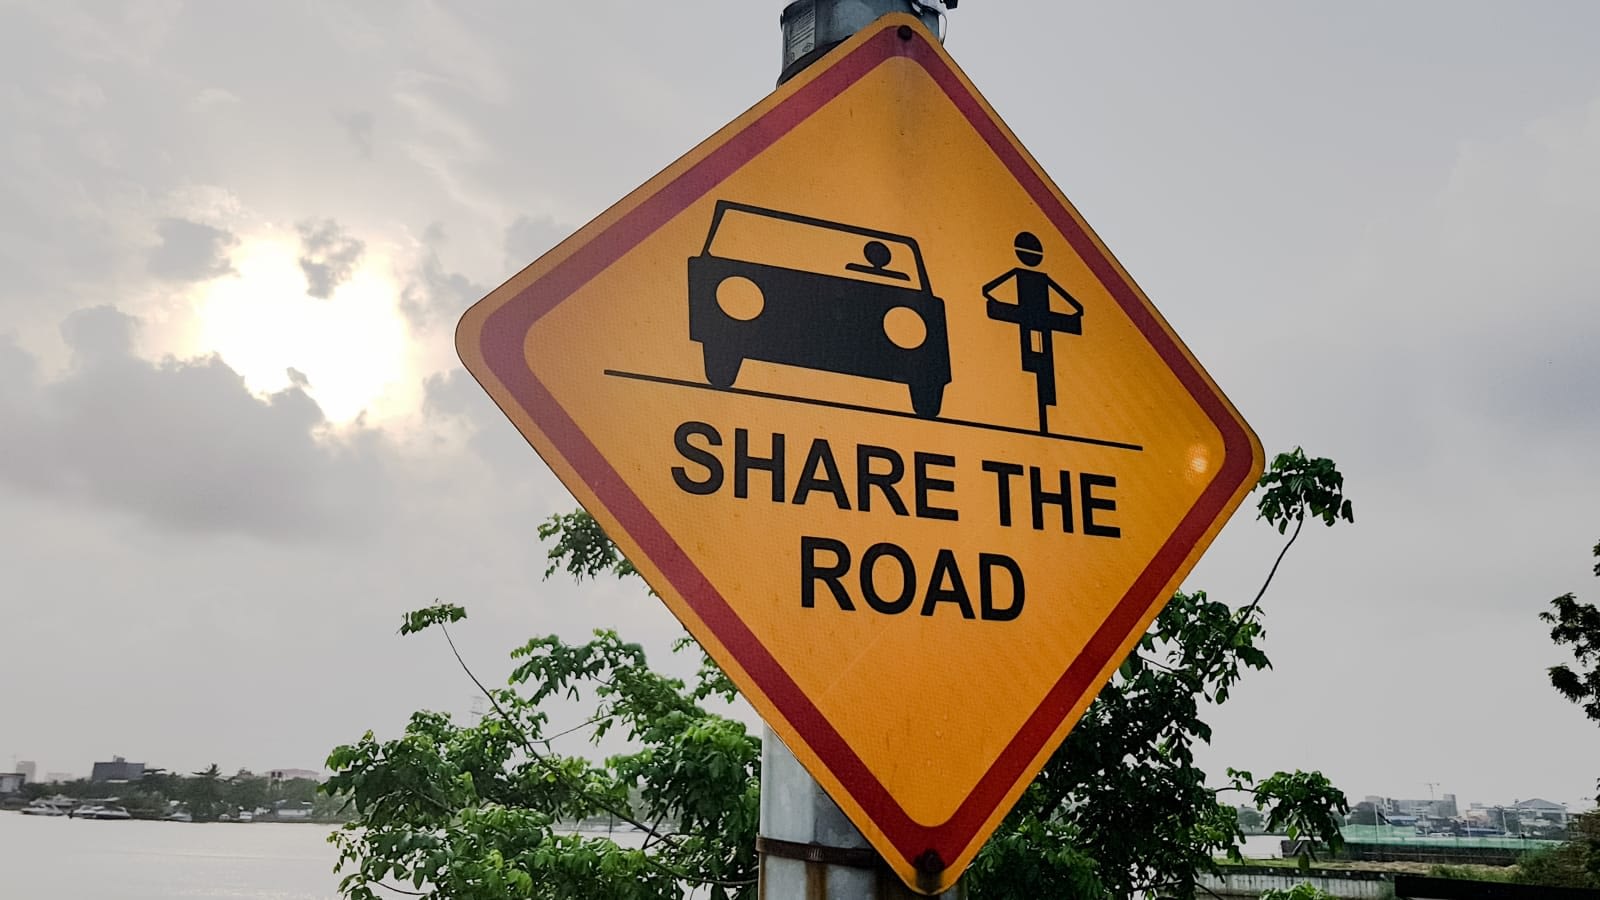 Share The Road traffic sign